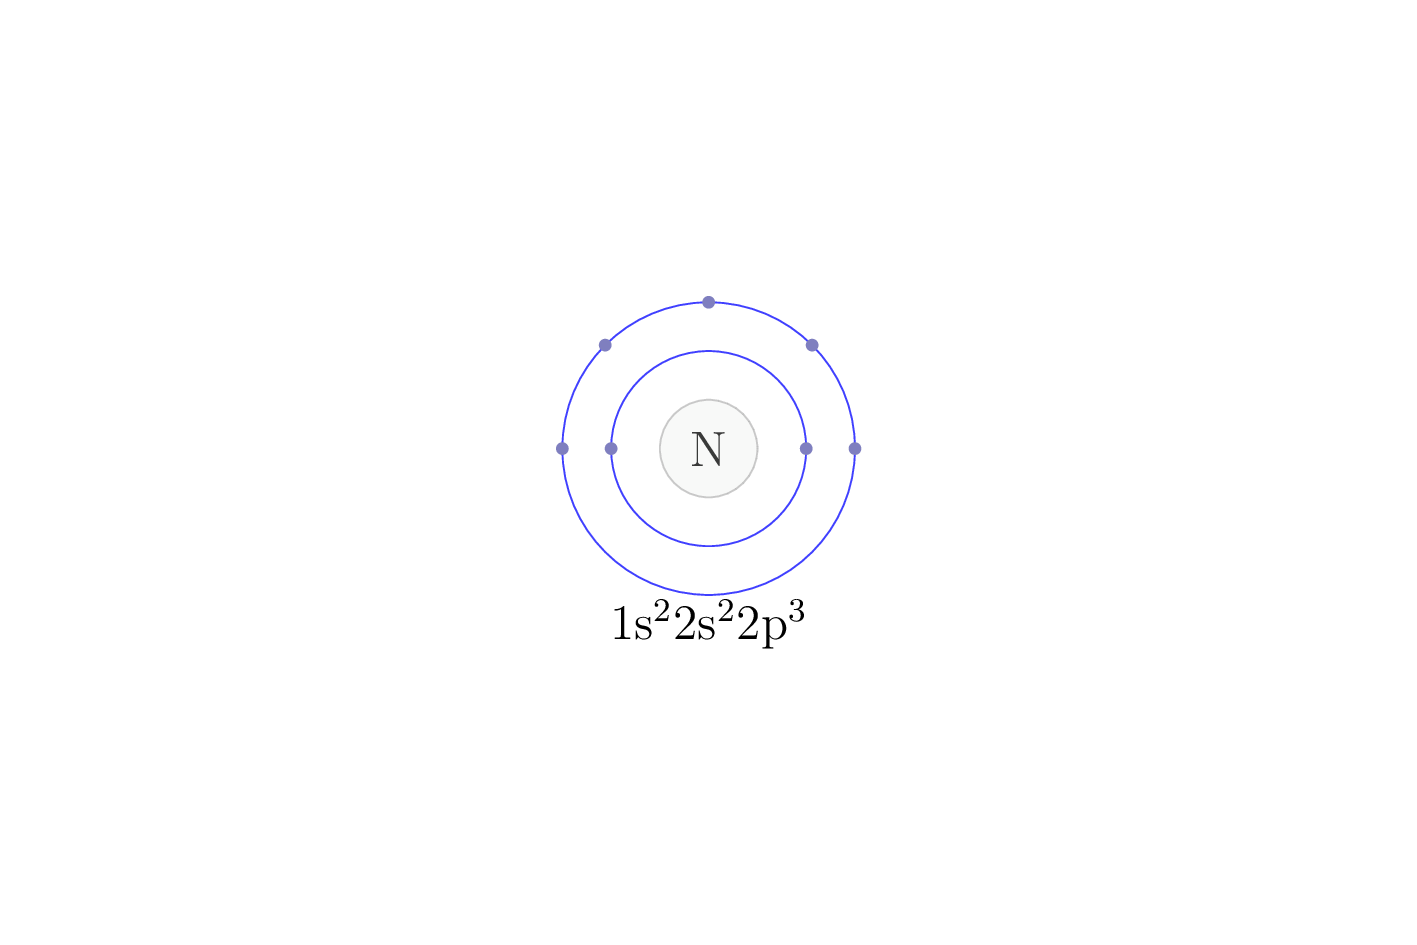 electron configuration of element N